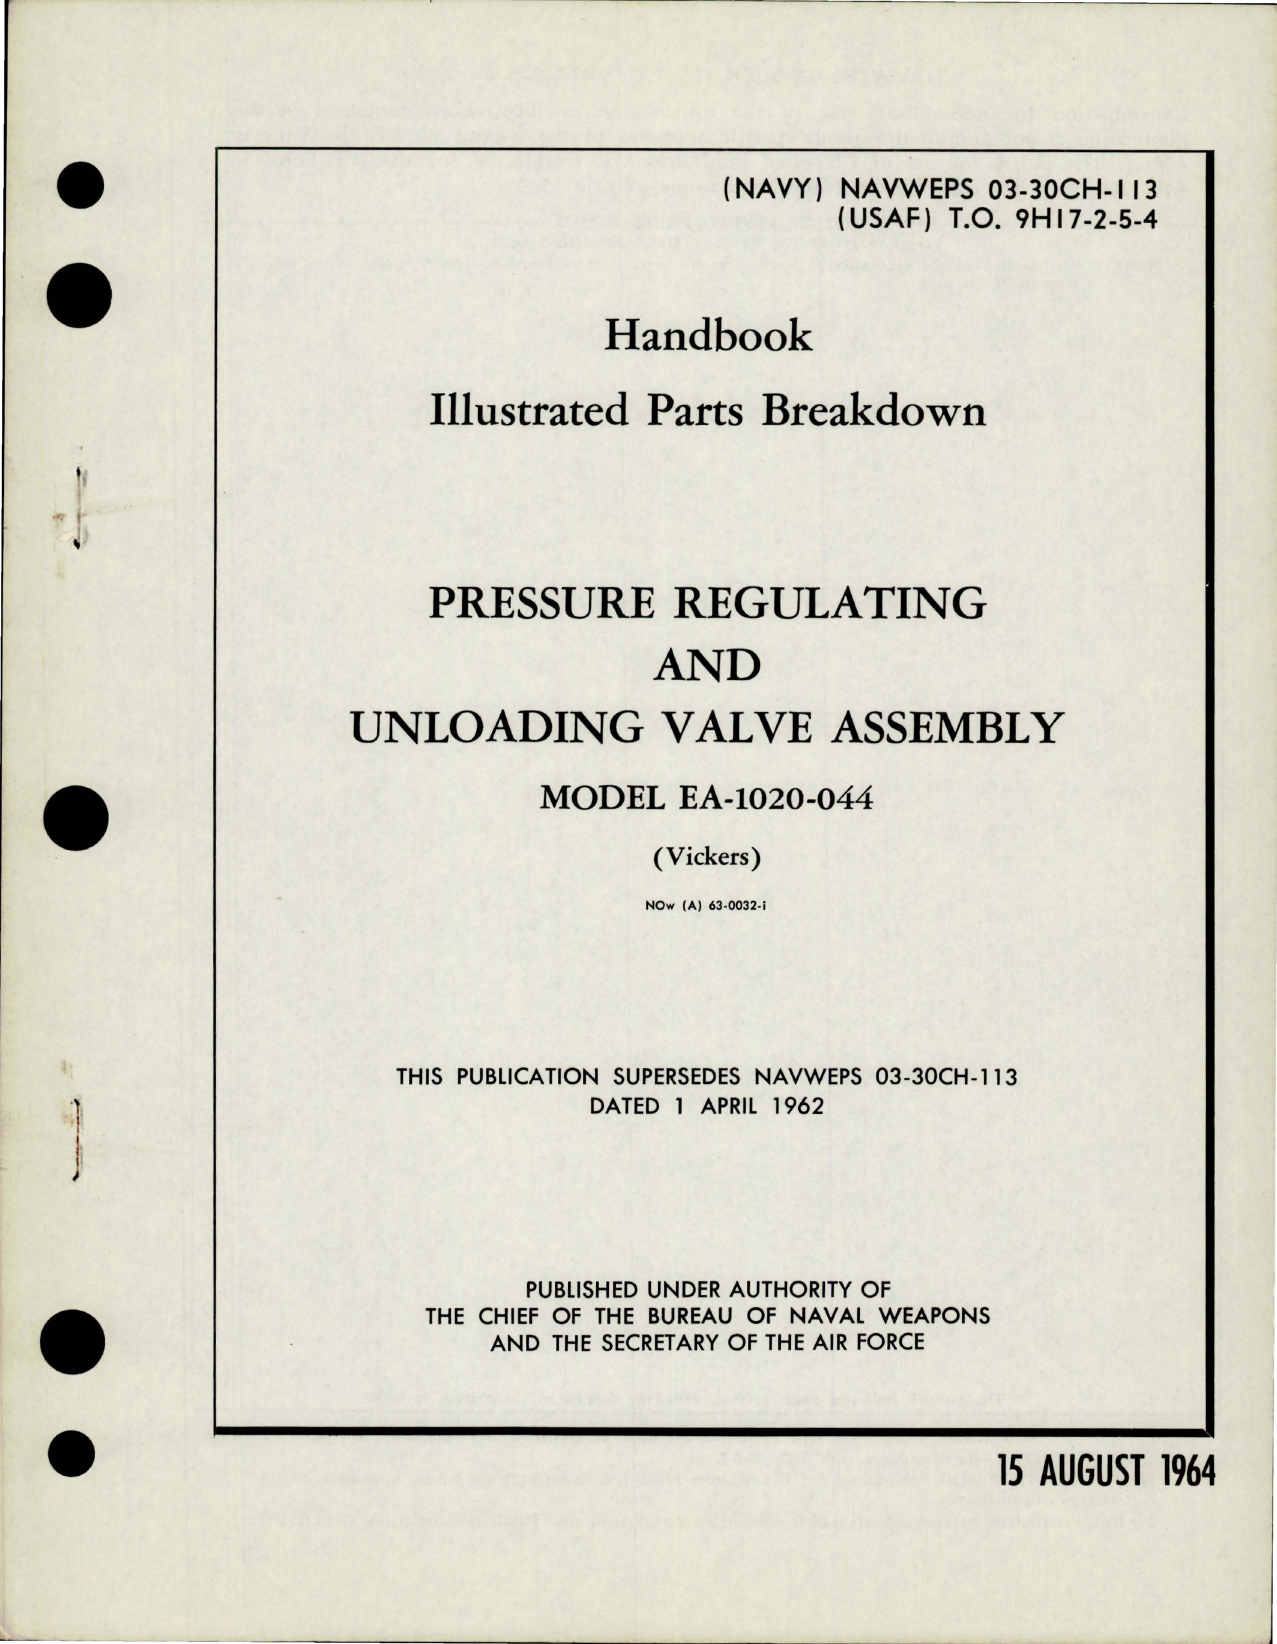 Sample page 1 from AirCorps Library document: Illustrated Parts Breakdown for Pressure Regulating and Unloading Valve Assembly - Model EA-1020-044 